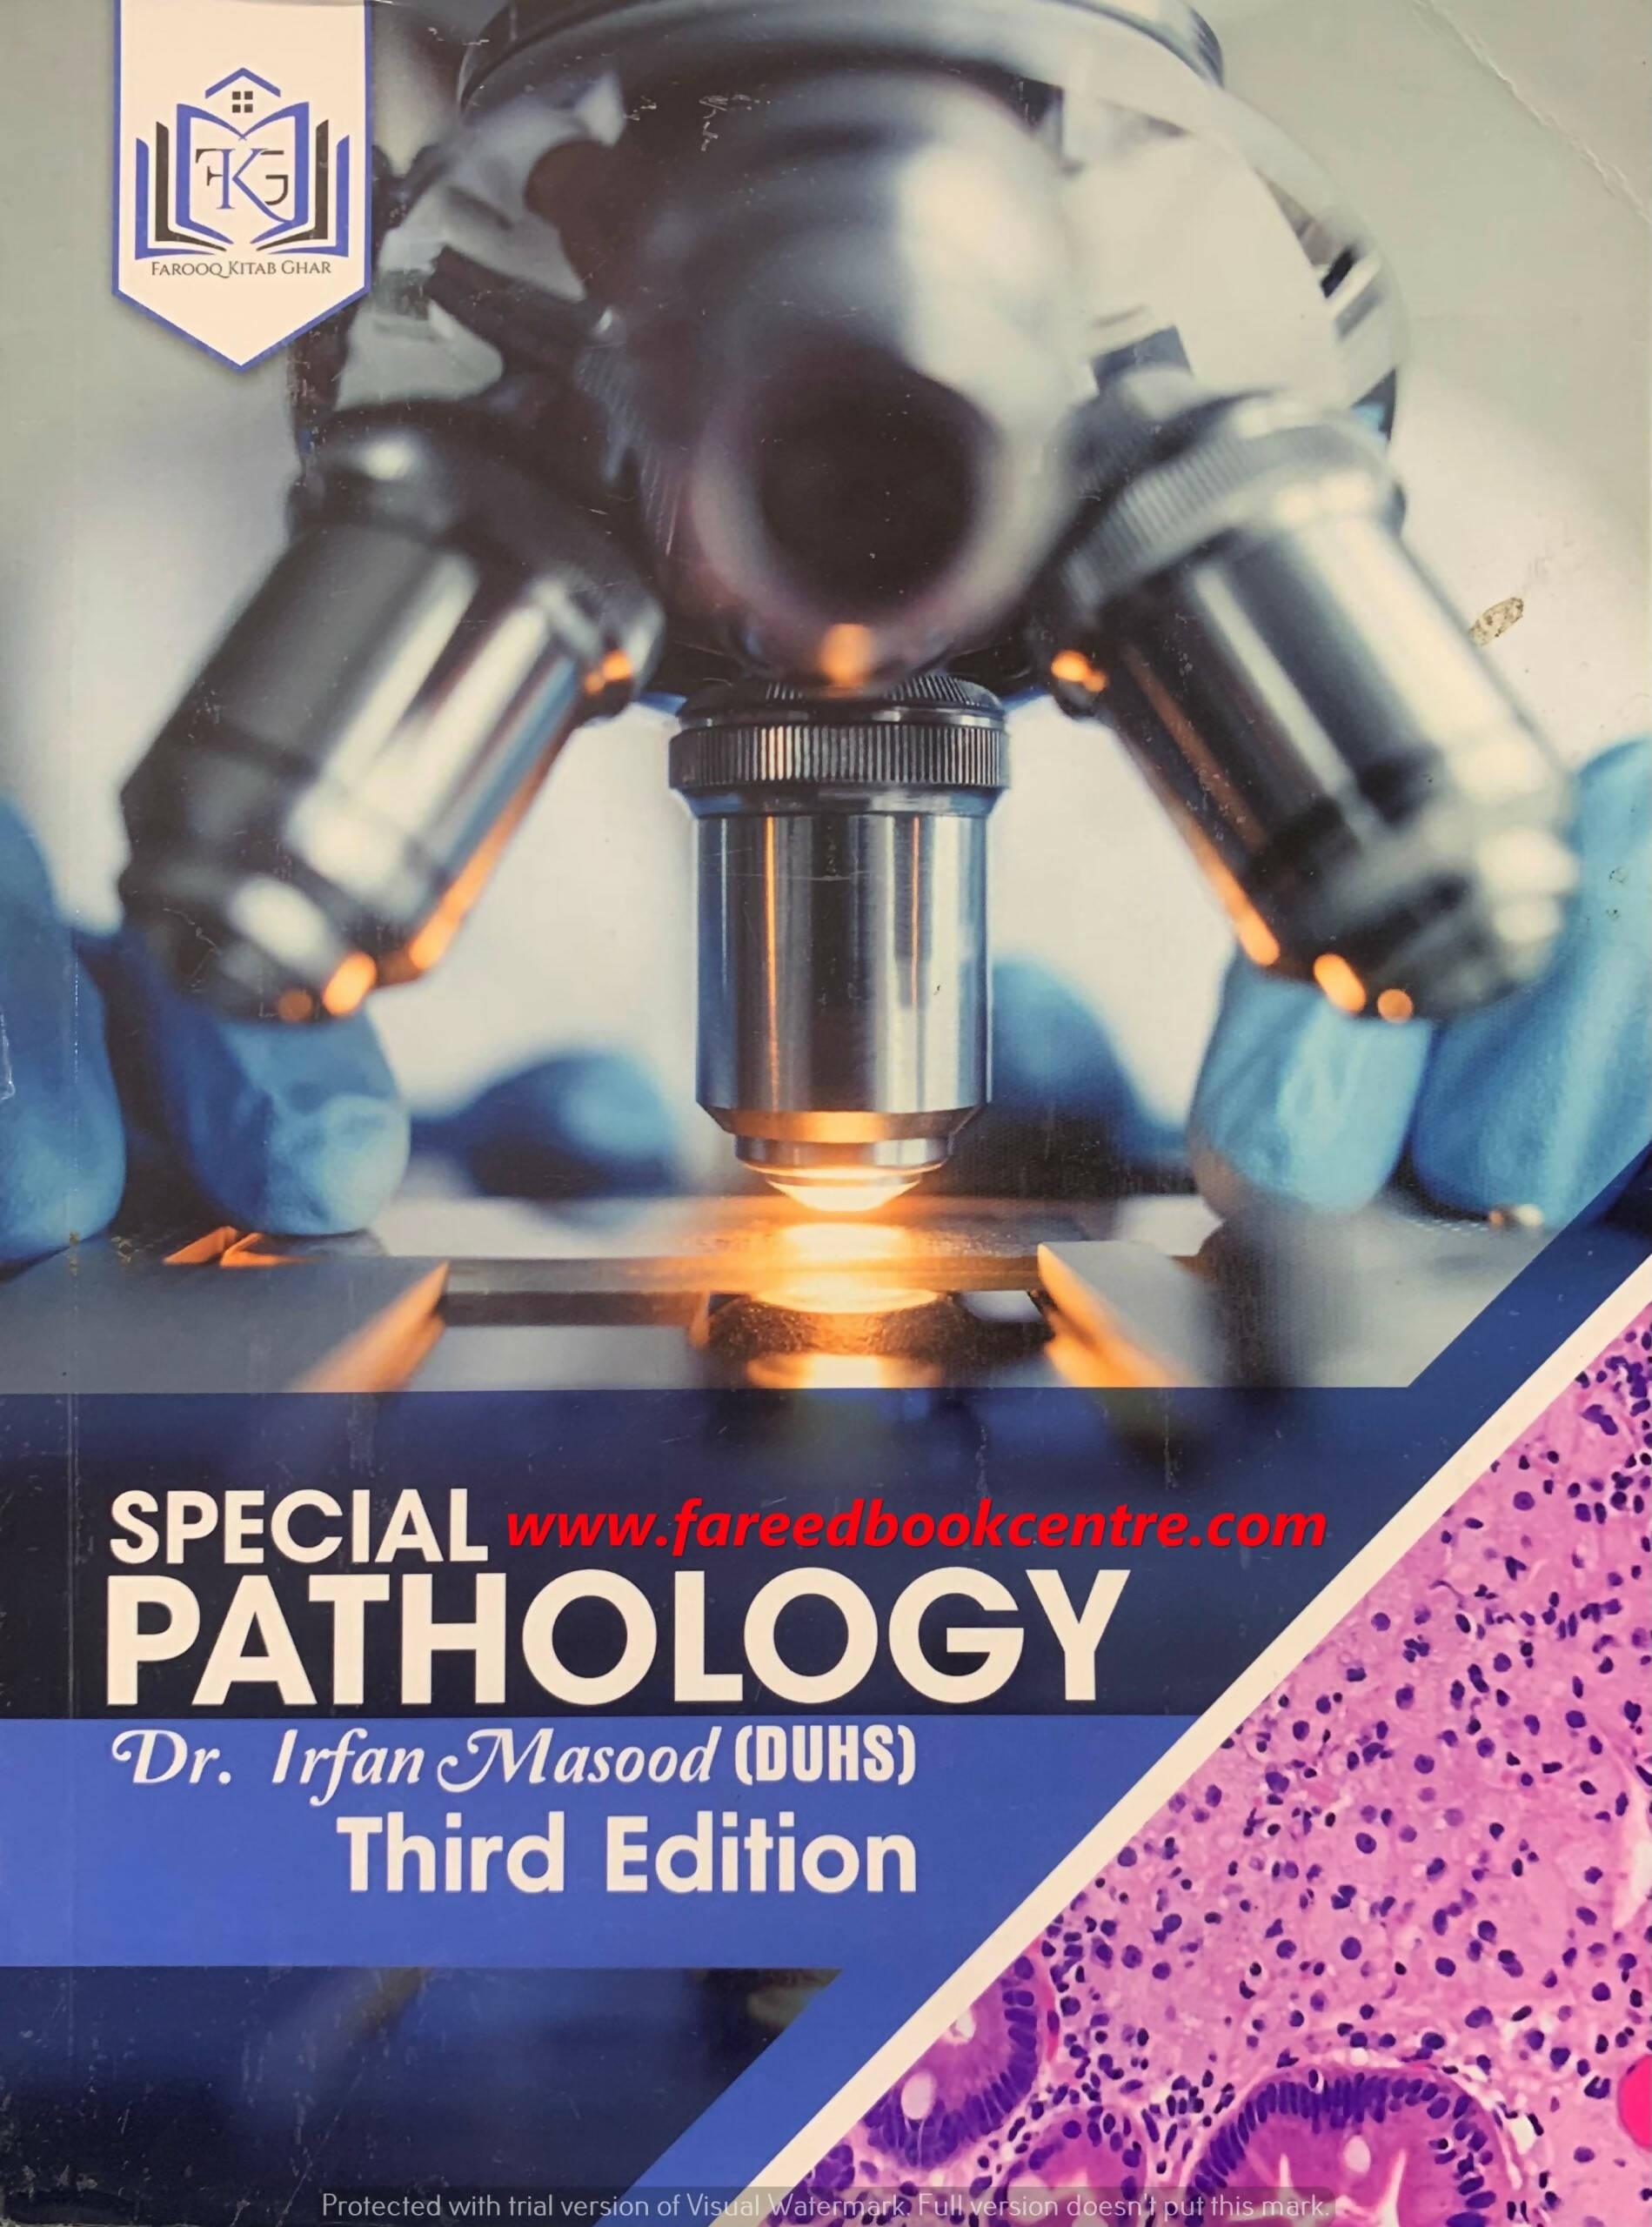 Special Pathology By Dr. Irfan Masood 3rd Edition - ValueBox